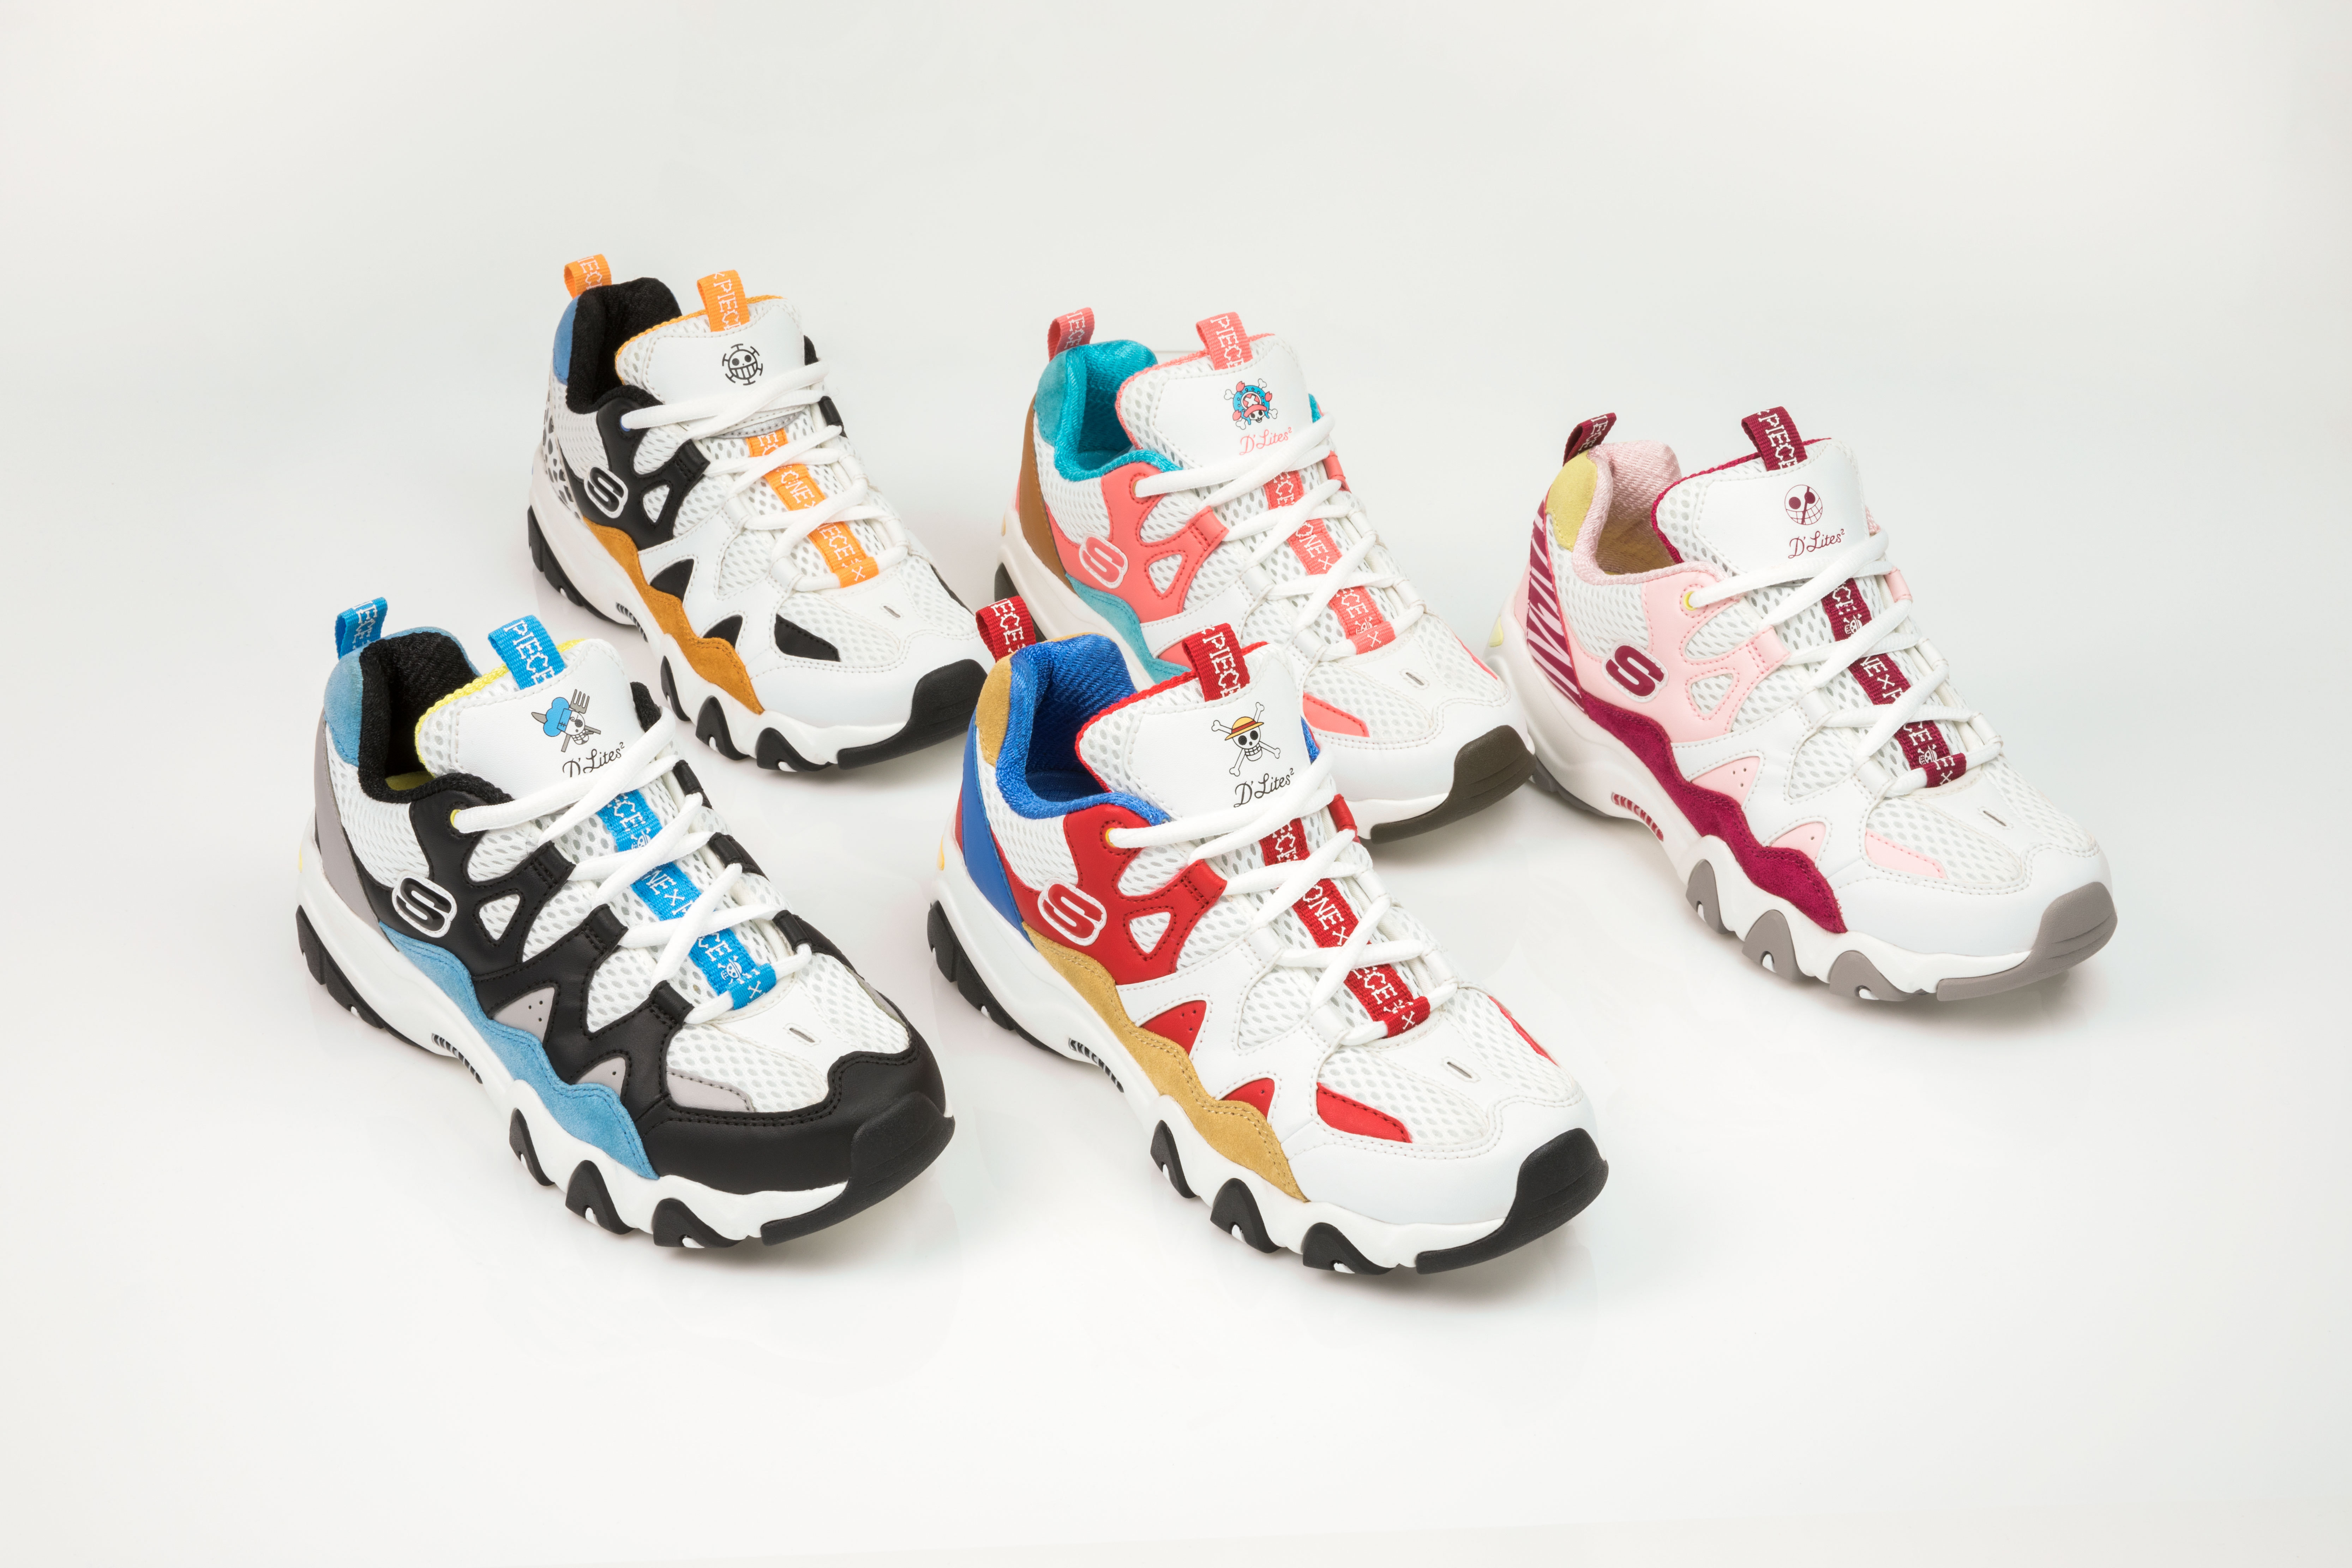 Limited Edition Skechers D'Lites & Toei Animation Inc's One Piece Collection to Launch in the States and Canada | Business Wire